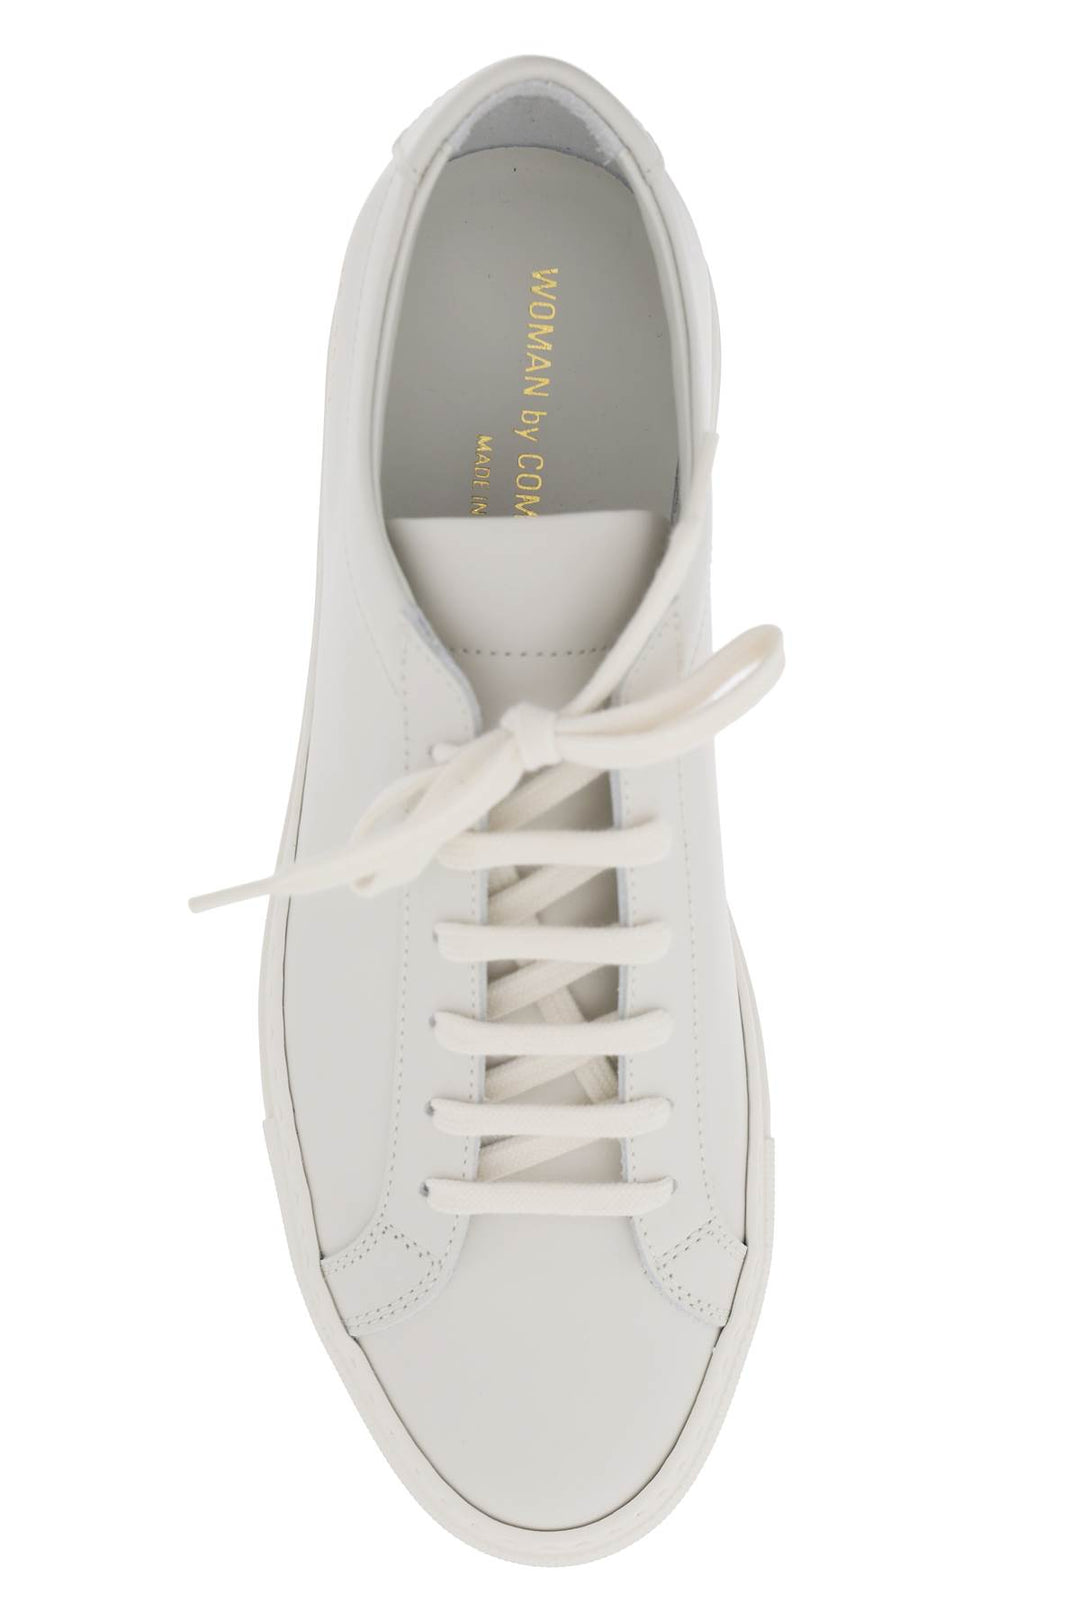 Common Projects Original Achilles Leather Sneakers   Bianco